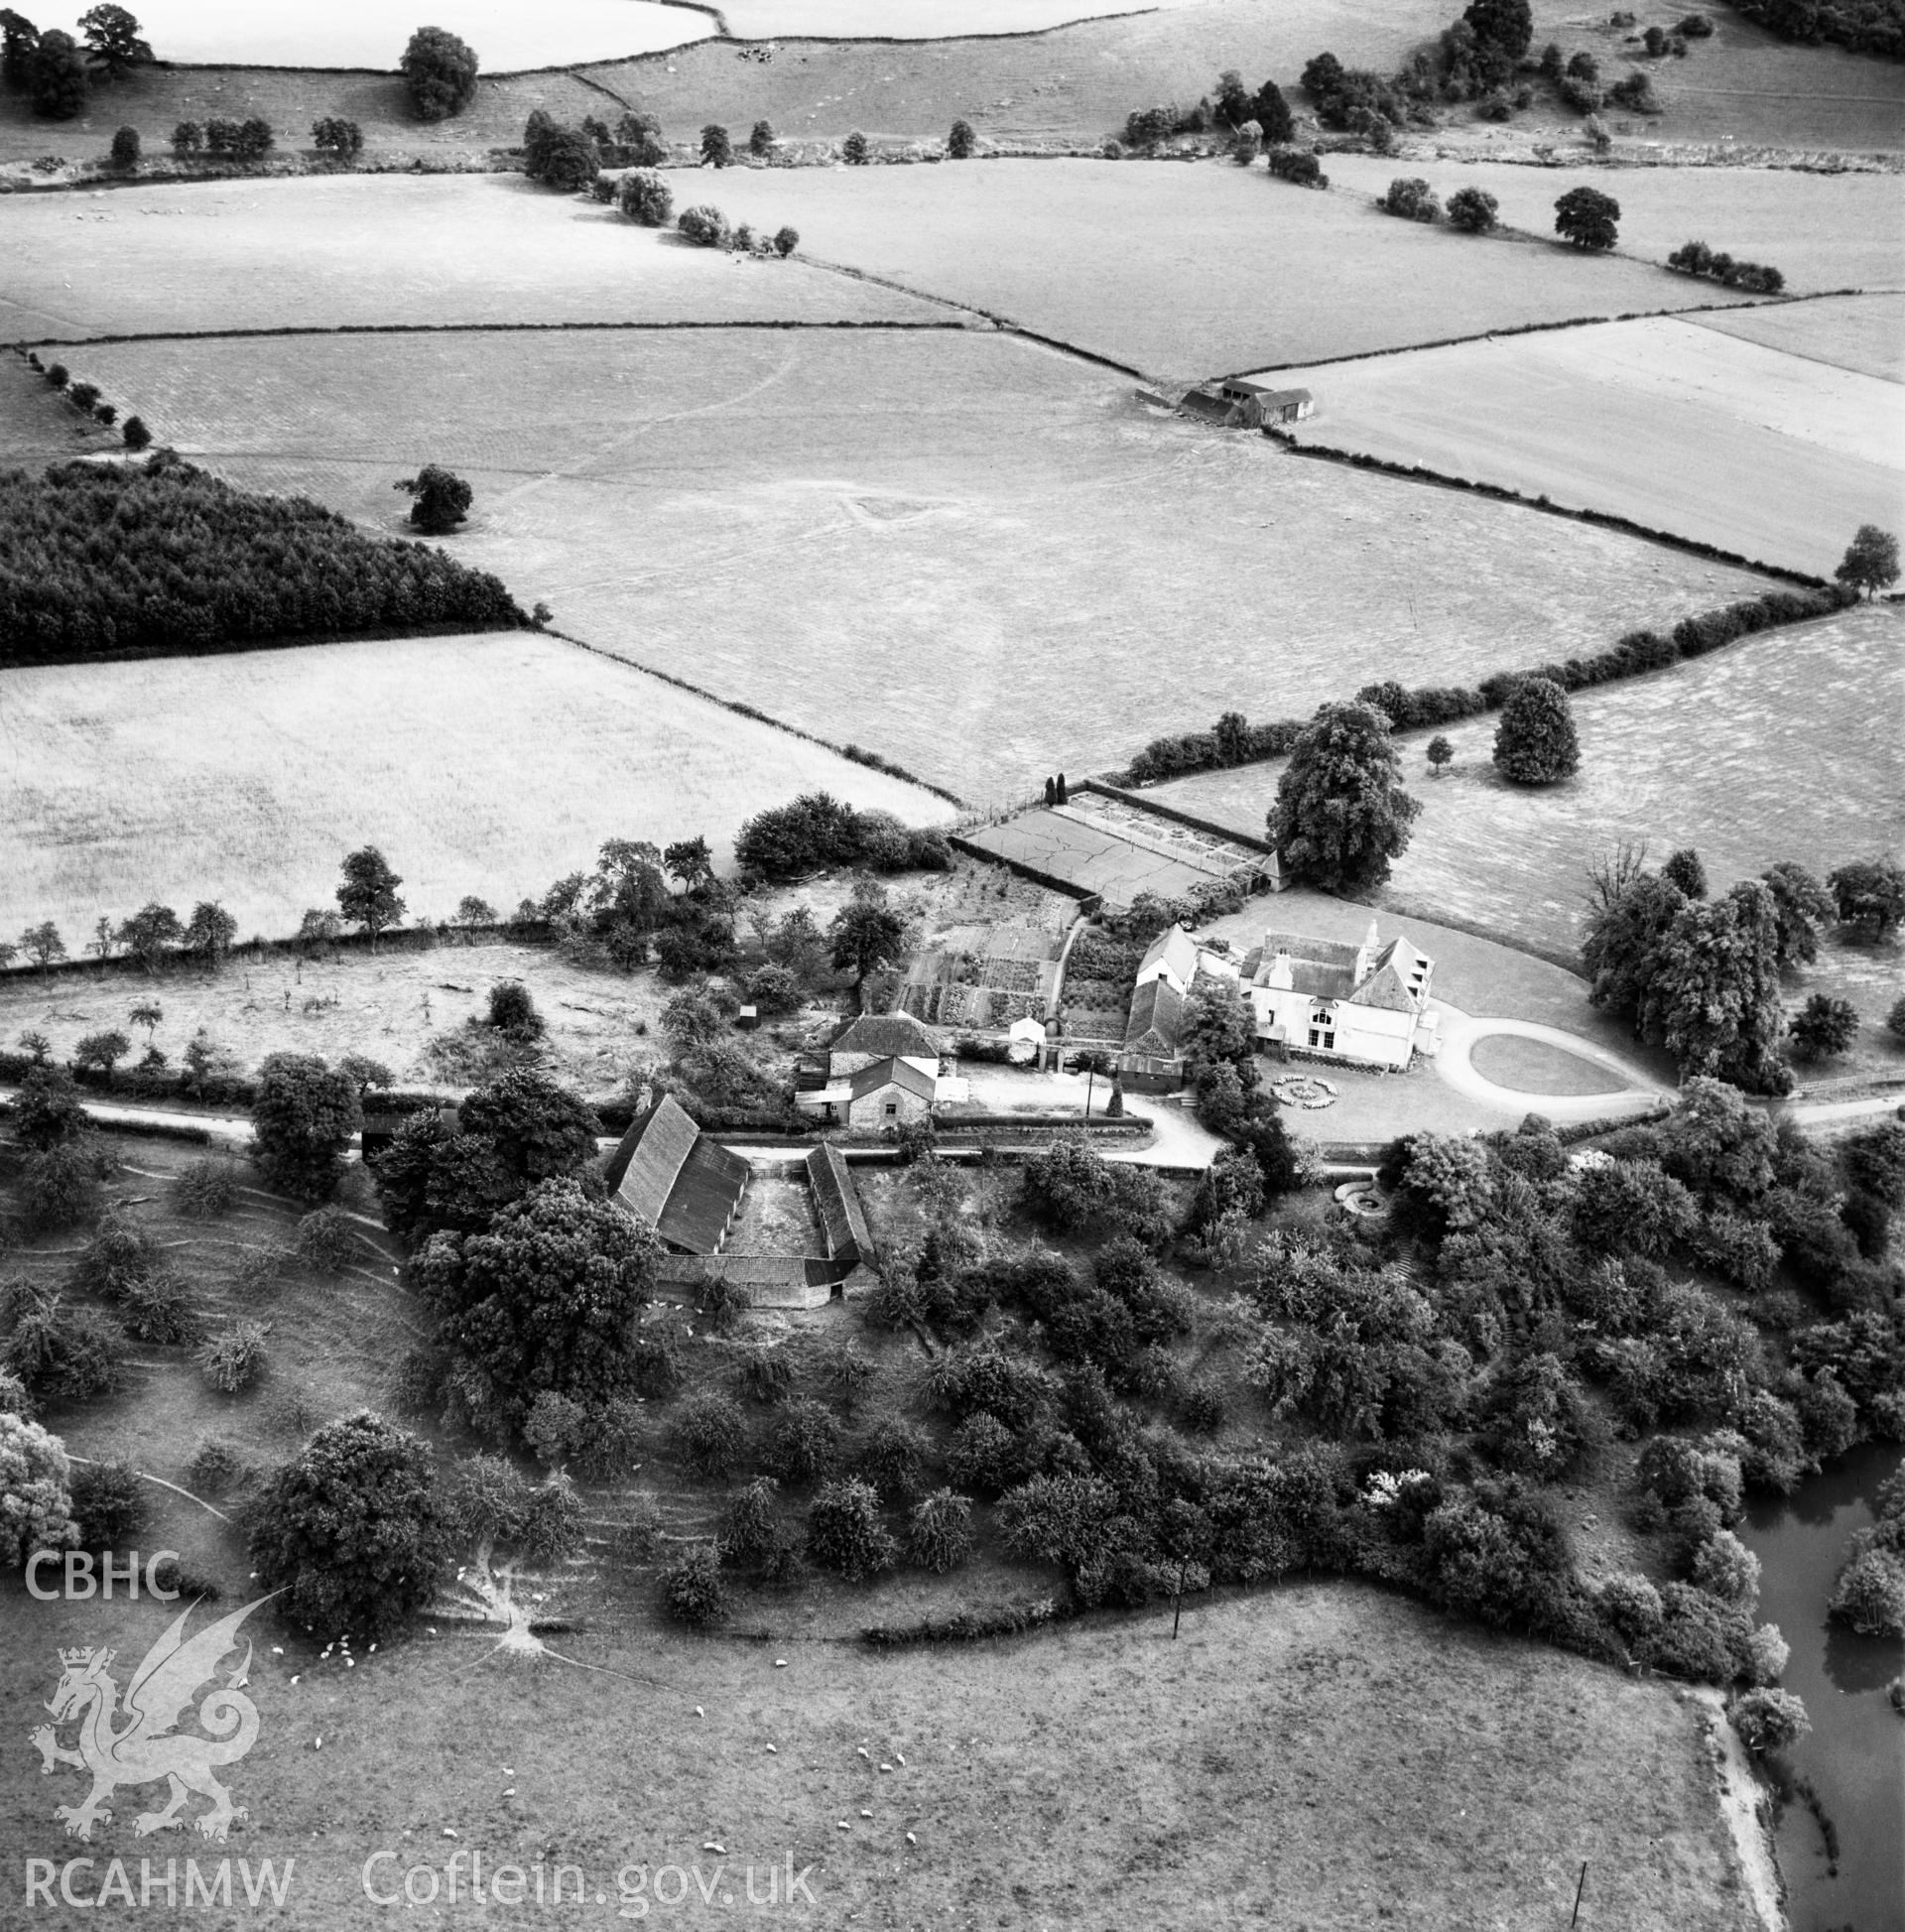 View of Rockfield Park and grounds, commissioned by D.H.Lloyd Esq., Bedford Cottage, Bury Road, Newmarket. Oblique aerial photograph, 5?" cut roll film.